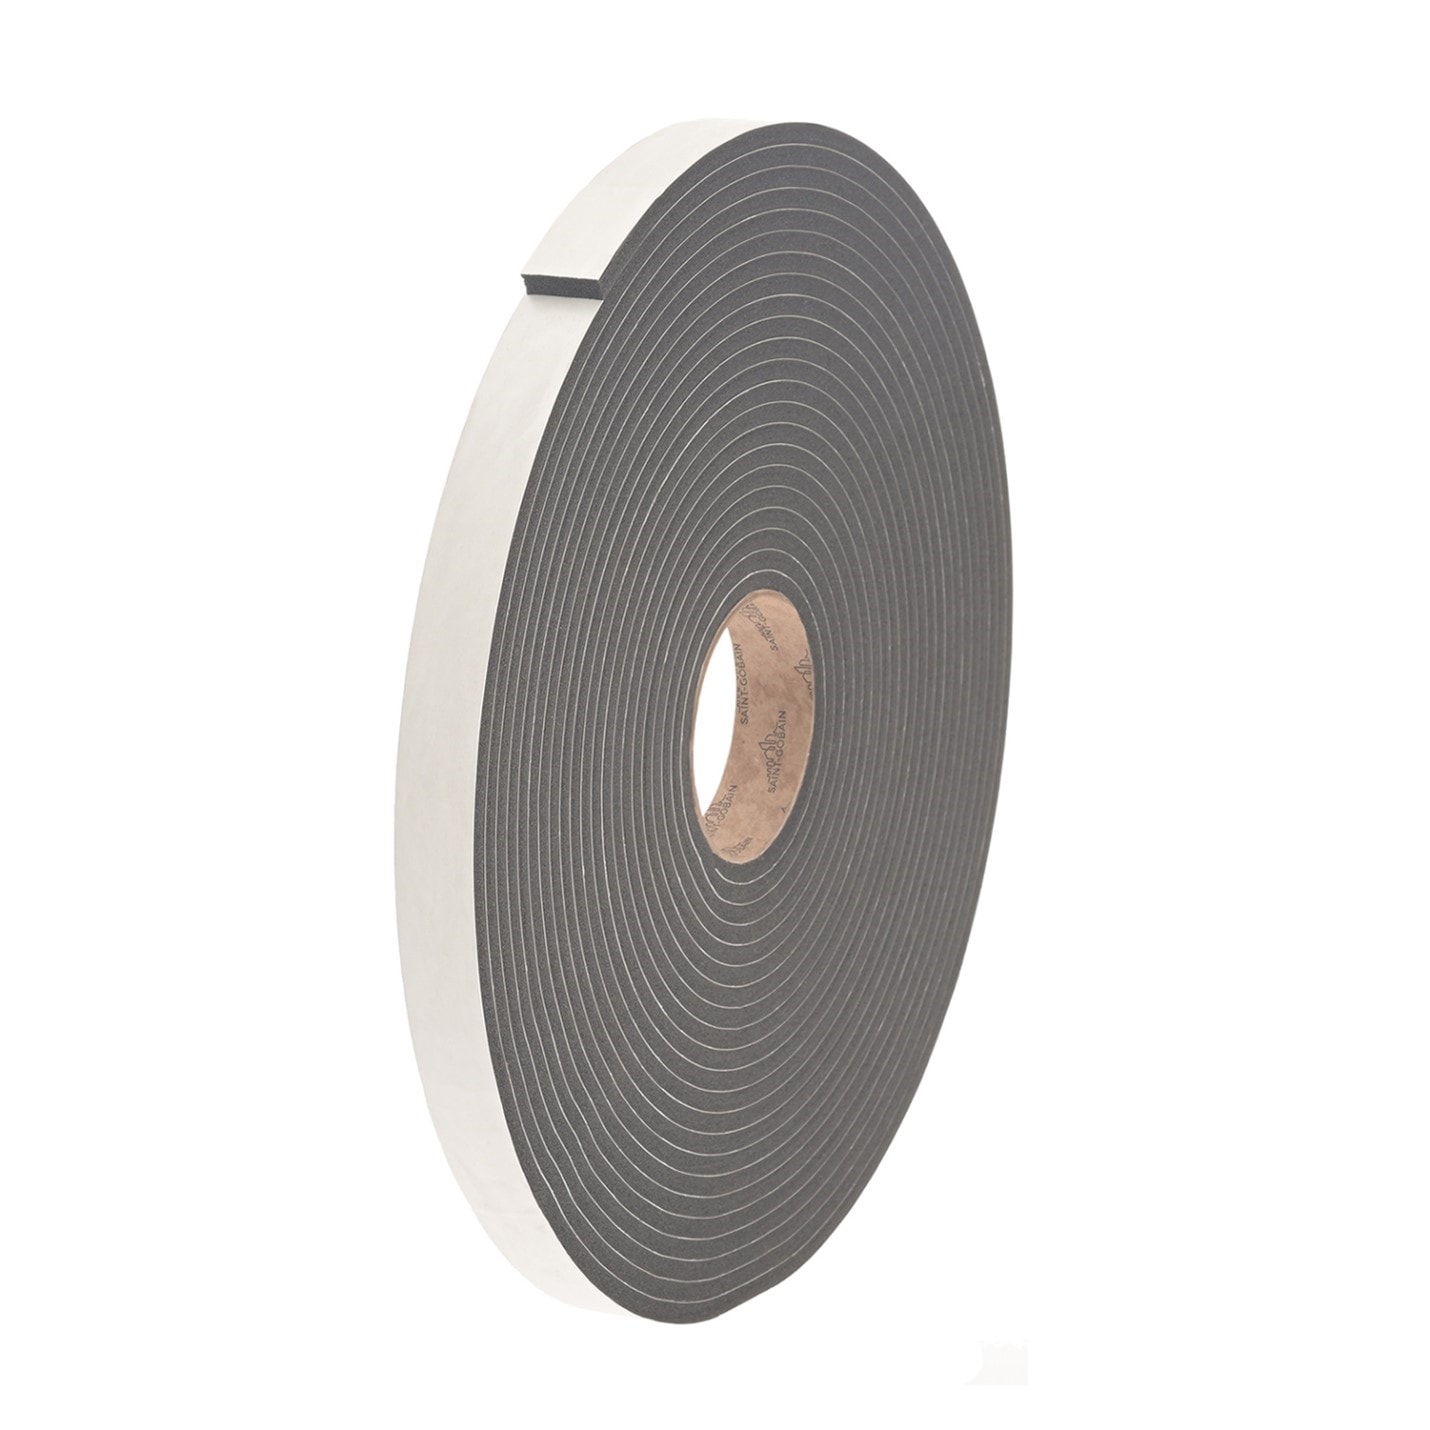 Norseal® PVC Foam Tapes - Workhorse Products for Gasketing, Sealing, and Cushioning Applications | Pittsburgh | Tom Brown, Inc.